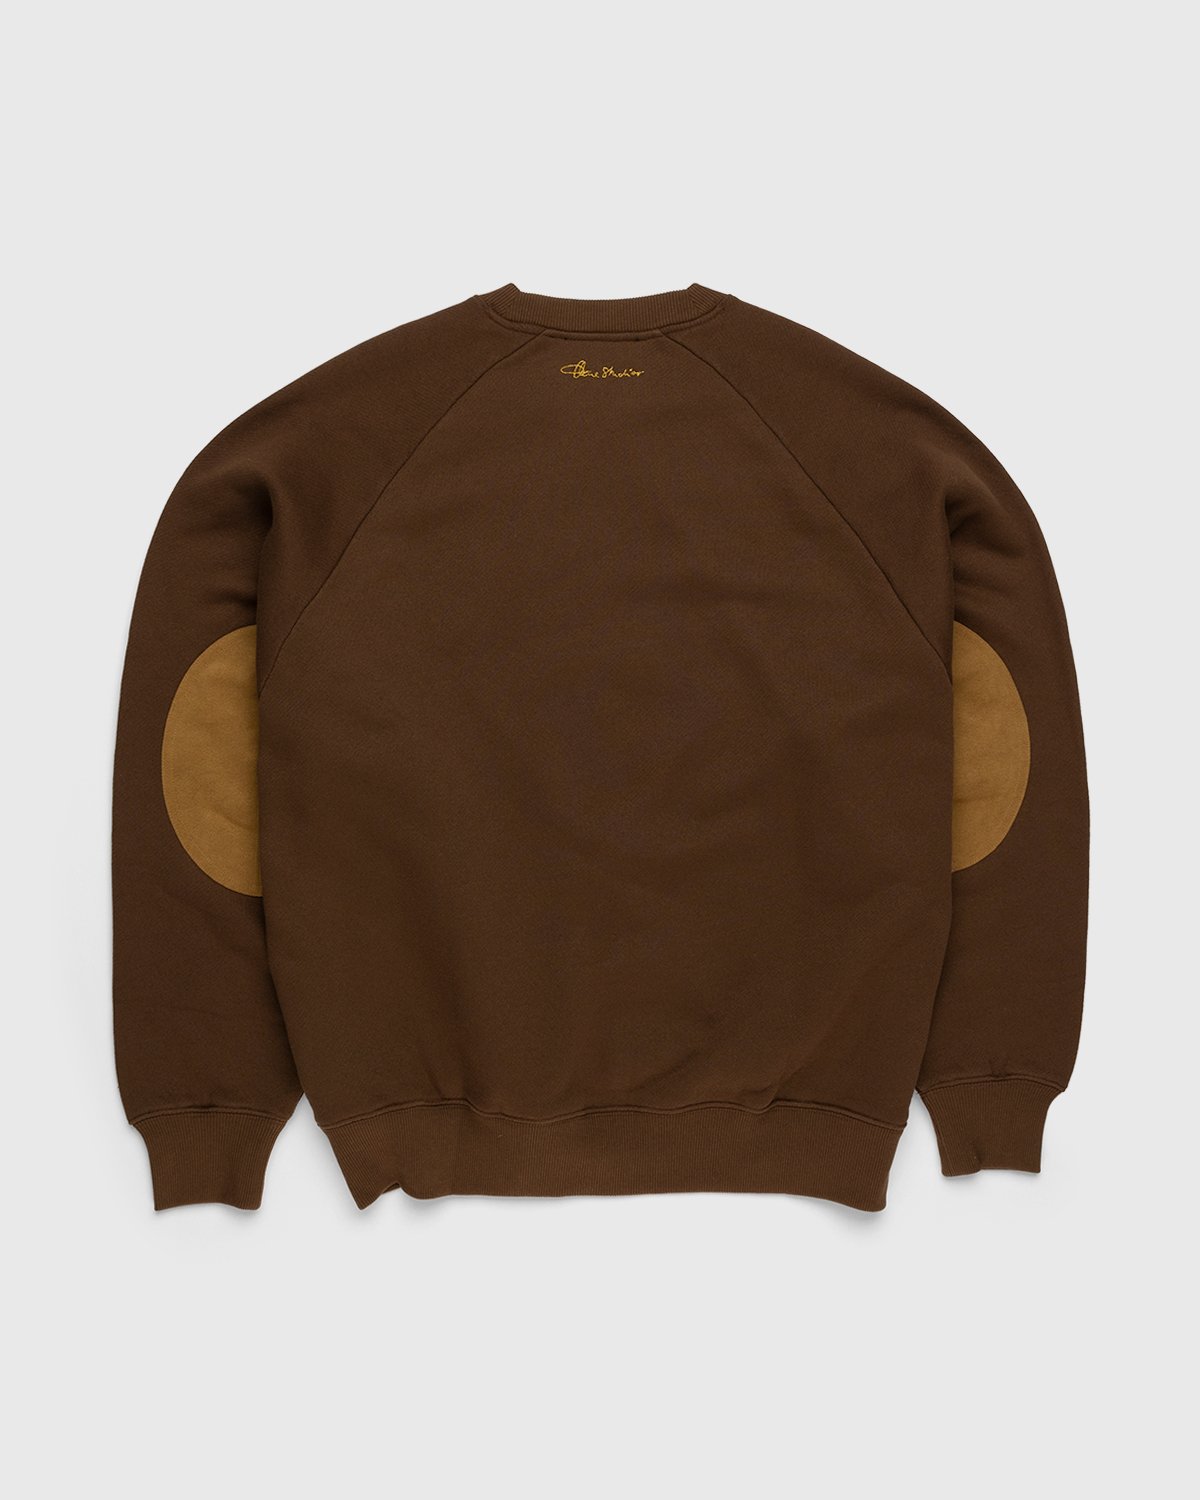 Acne Studios - Sweater Brown - Clothing - Brown - Image 2